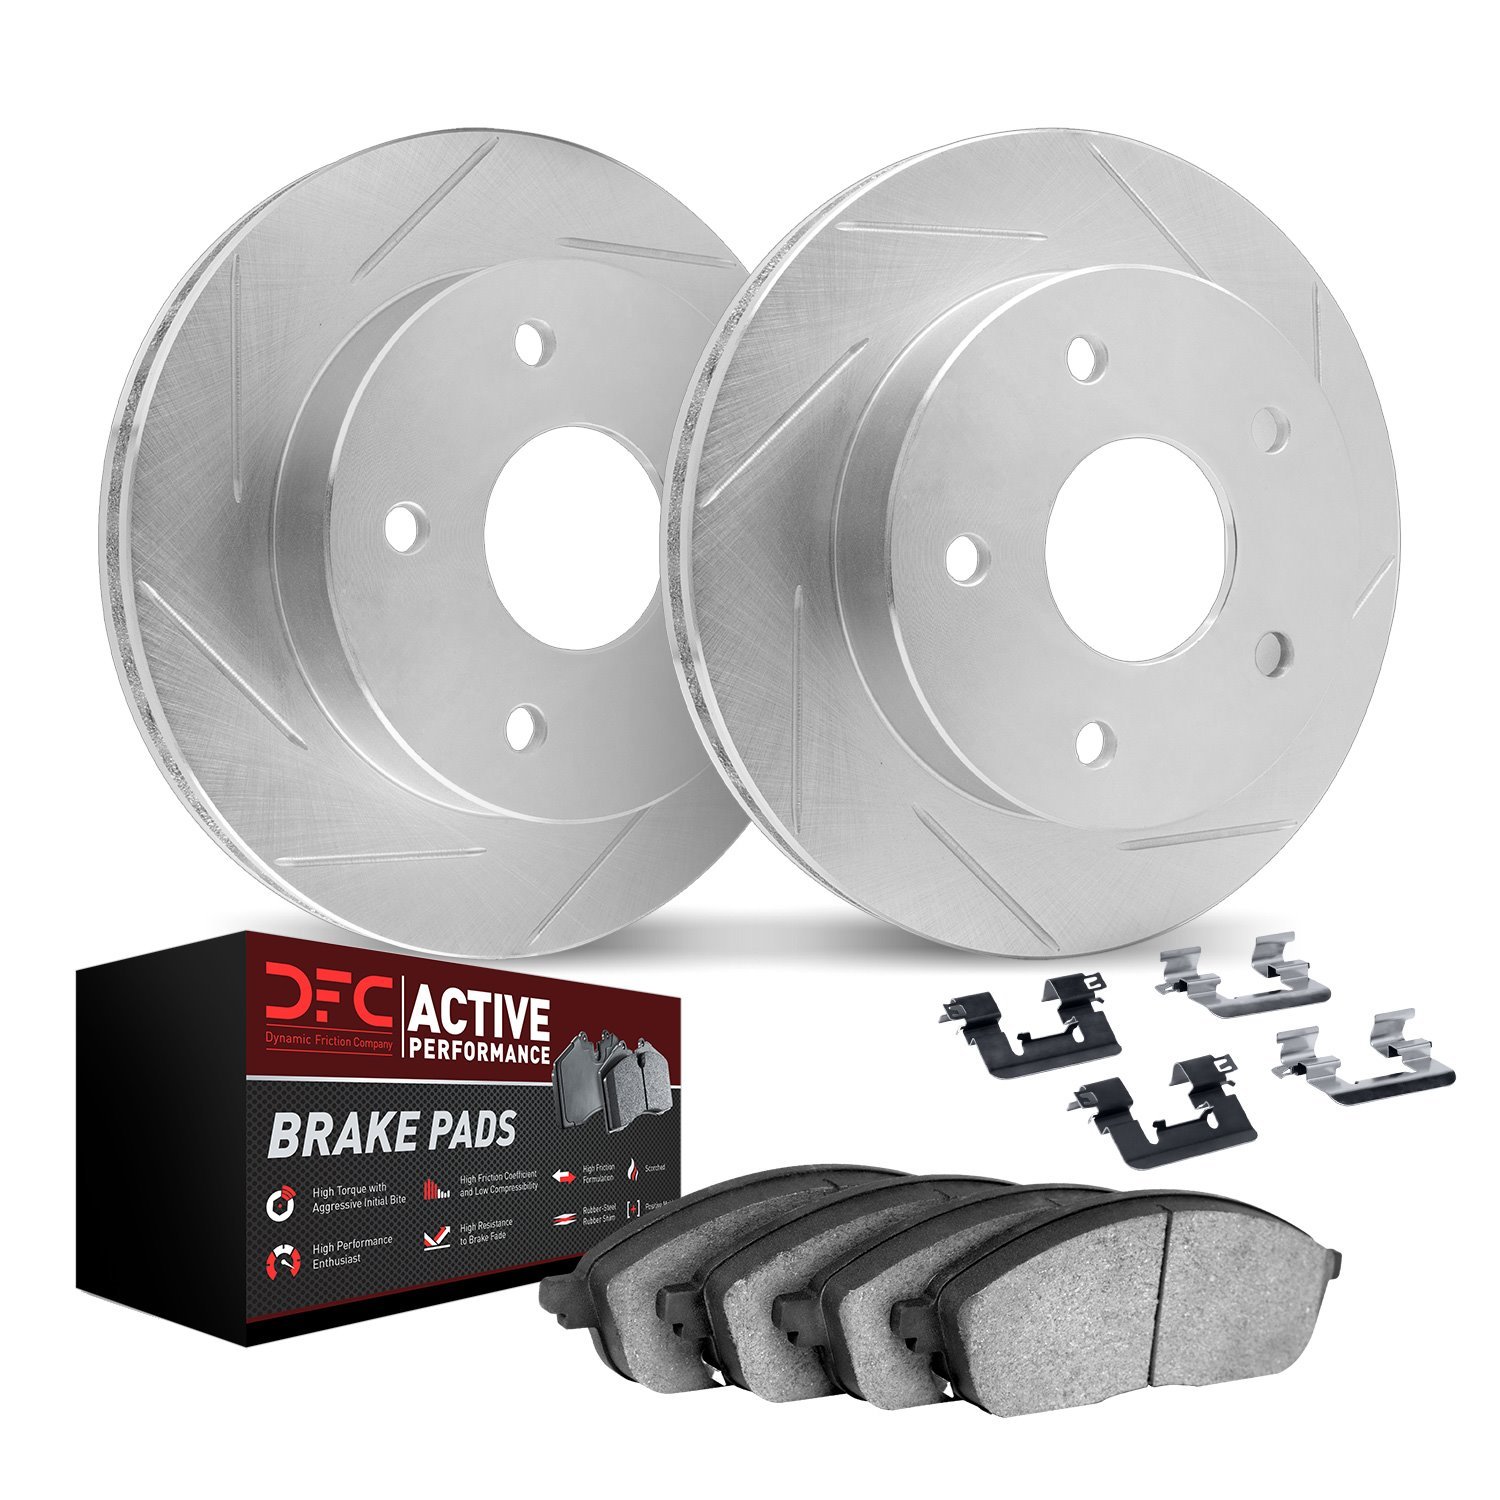 2712-13045 Geoperformance Slotted Brake Rotors with Active Performance Pads Kits & Hardware, Fits Select Multiple Makes/Models,